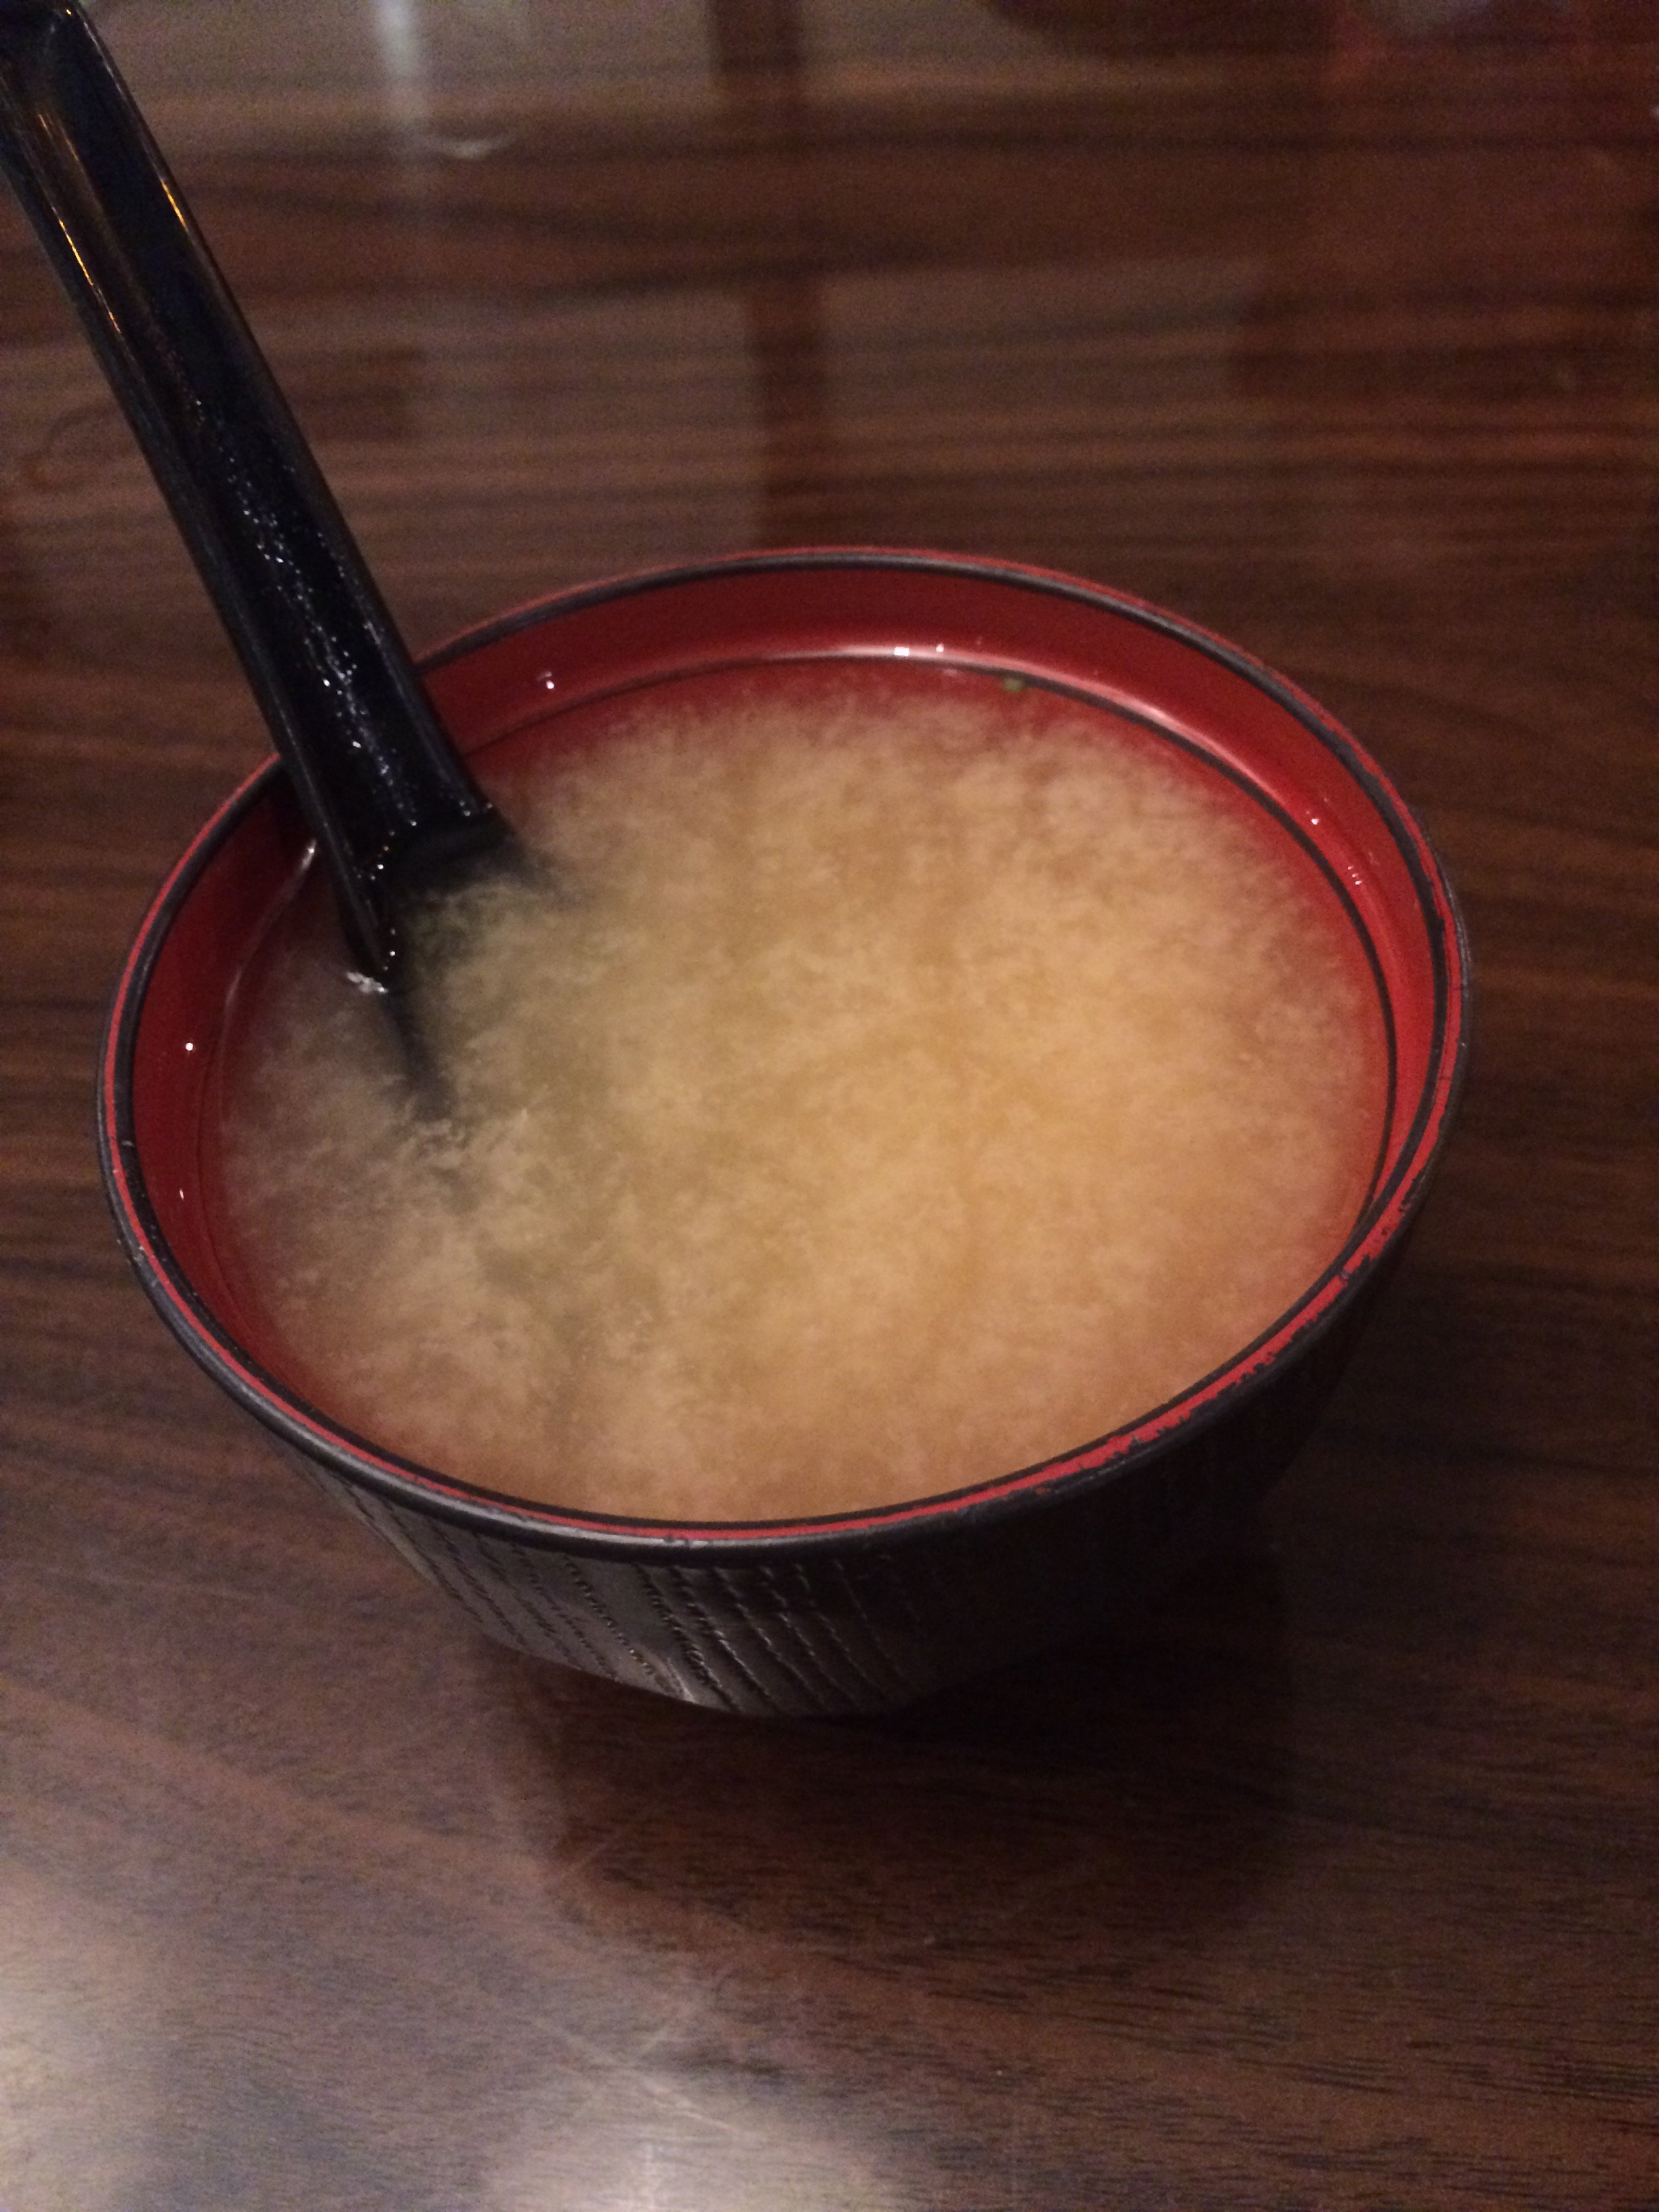 miso soup Dealing with the Health Hazards of Airplane Travel